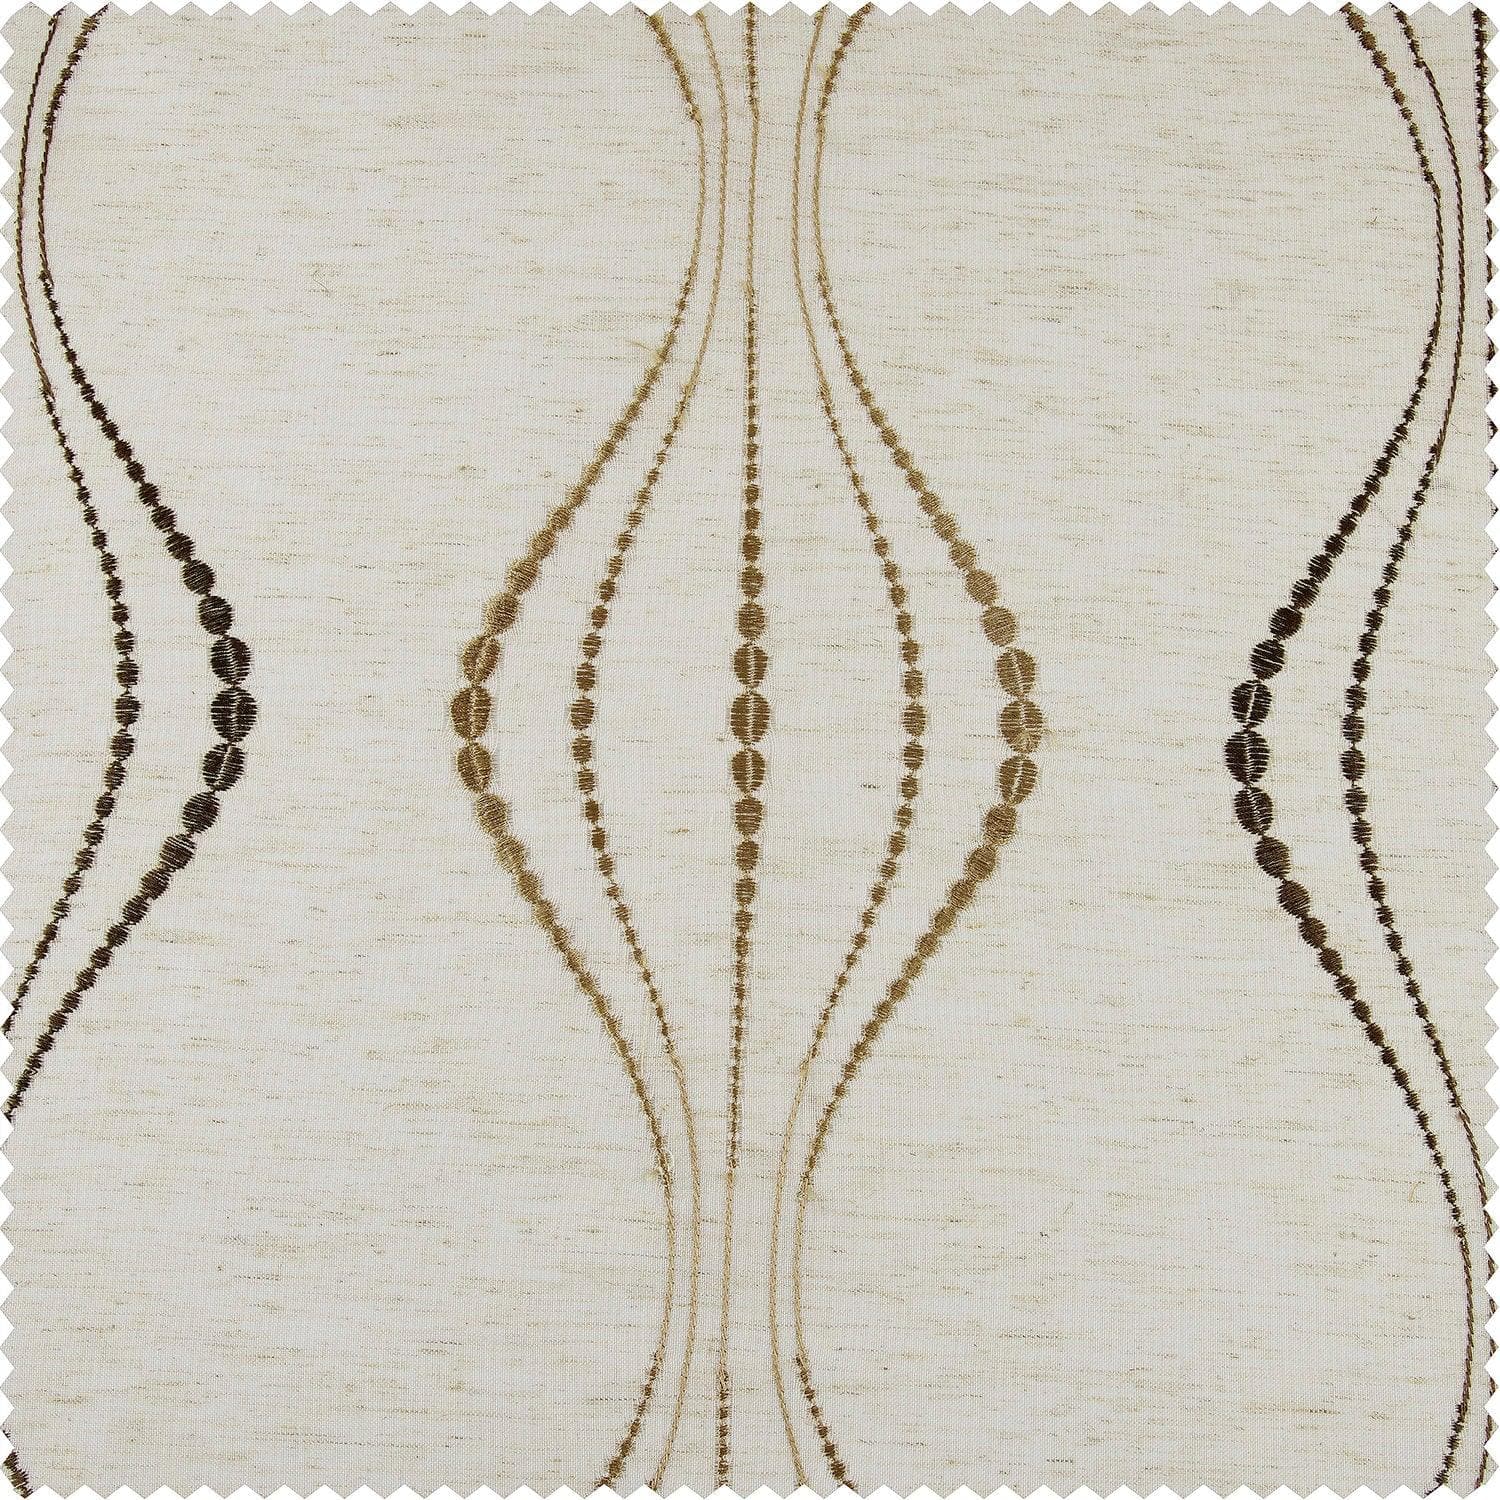 Suez Bronze Embroidered Patterned Faux Linen Sheer Custom Curtain